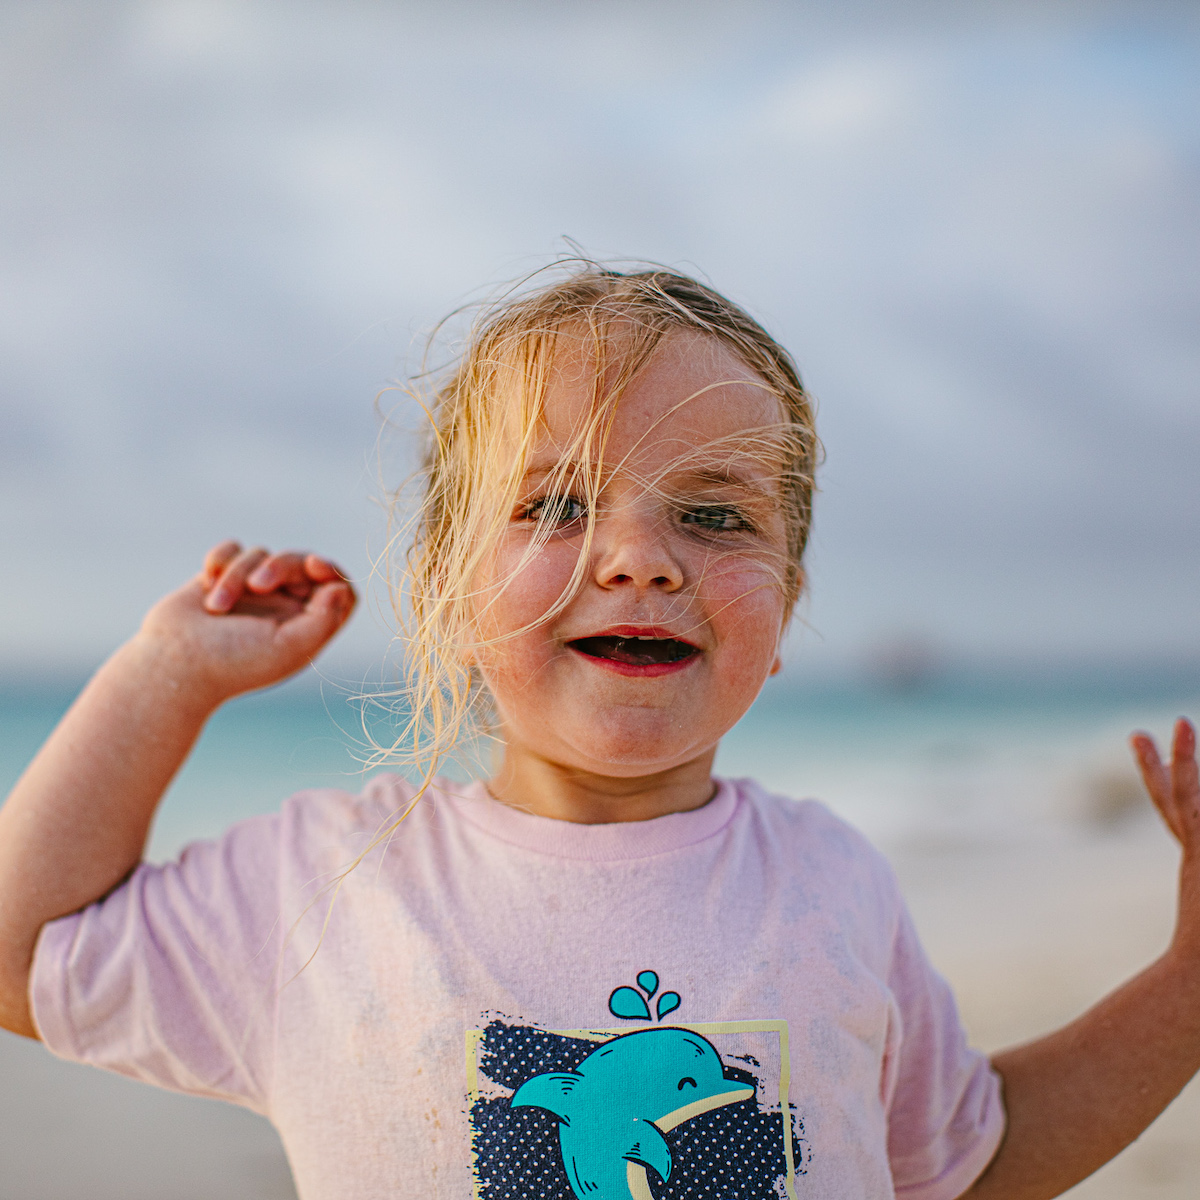 Child smiling at camera on beach